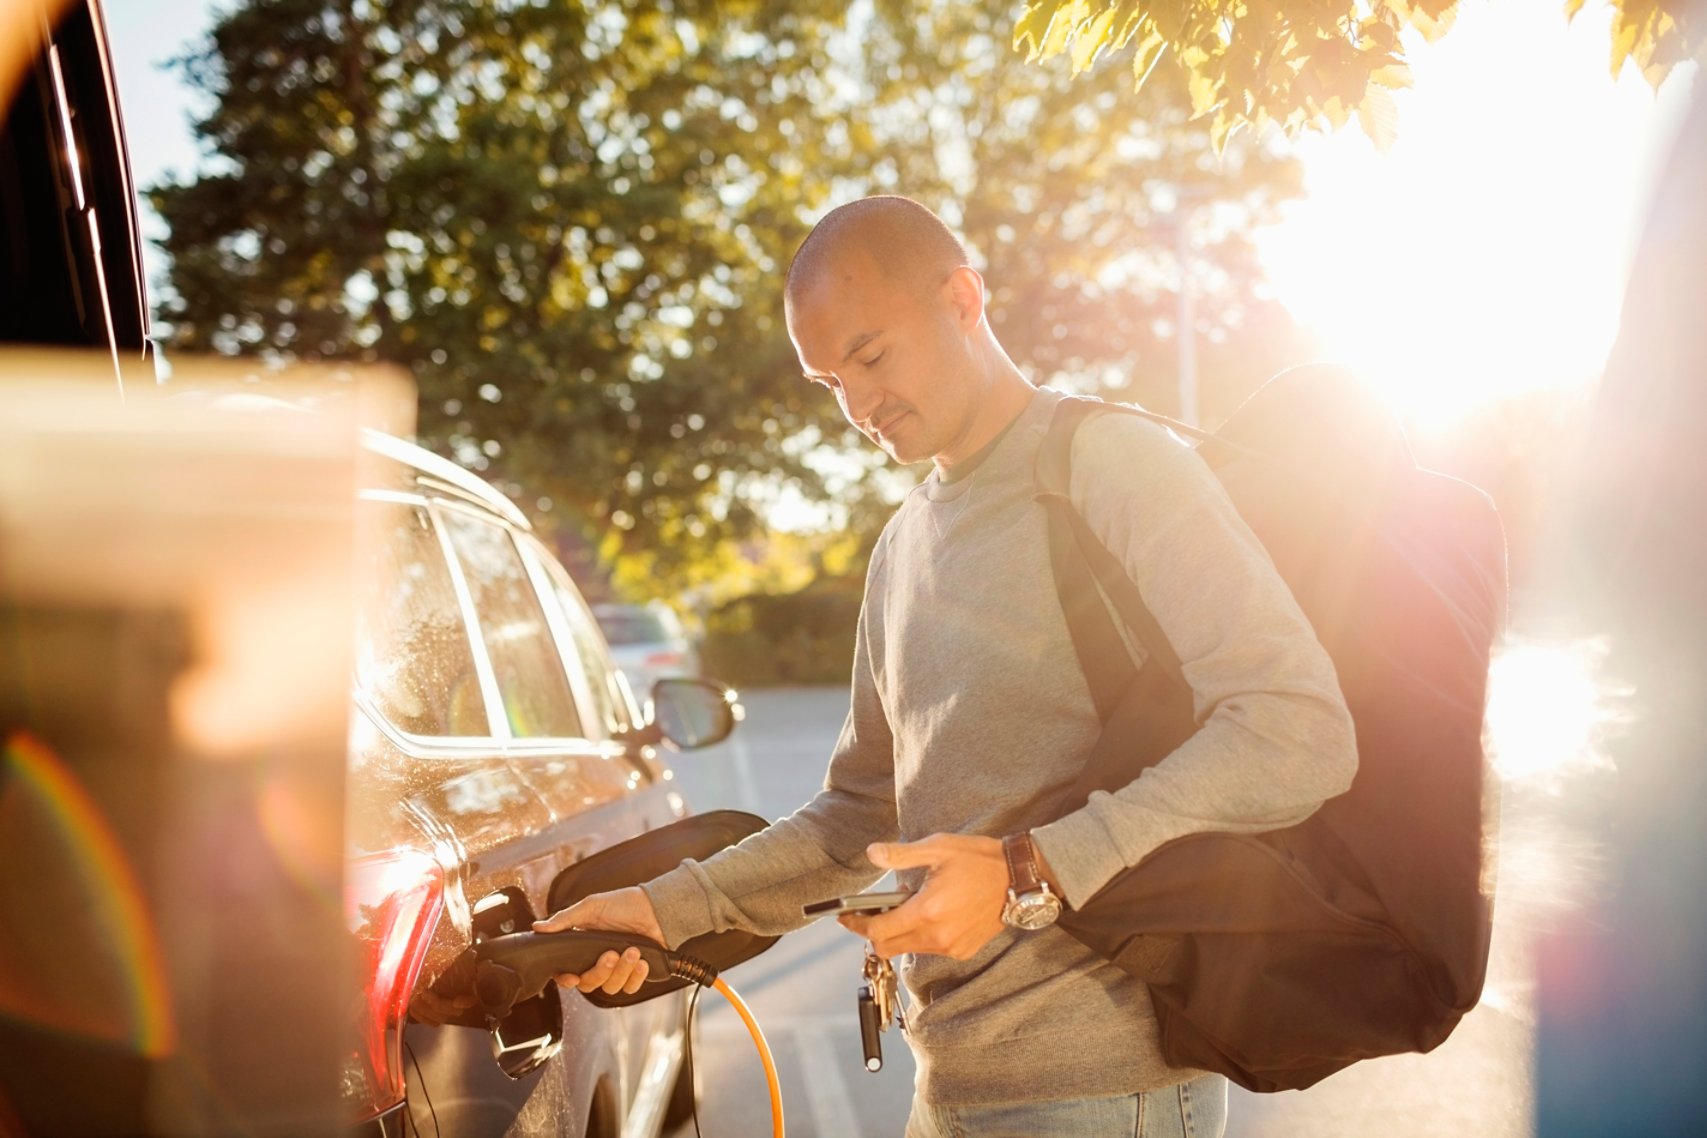 A man fueling his car while holding a phone